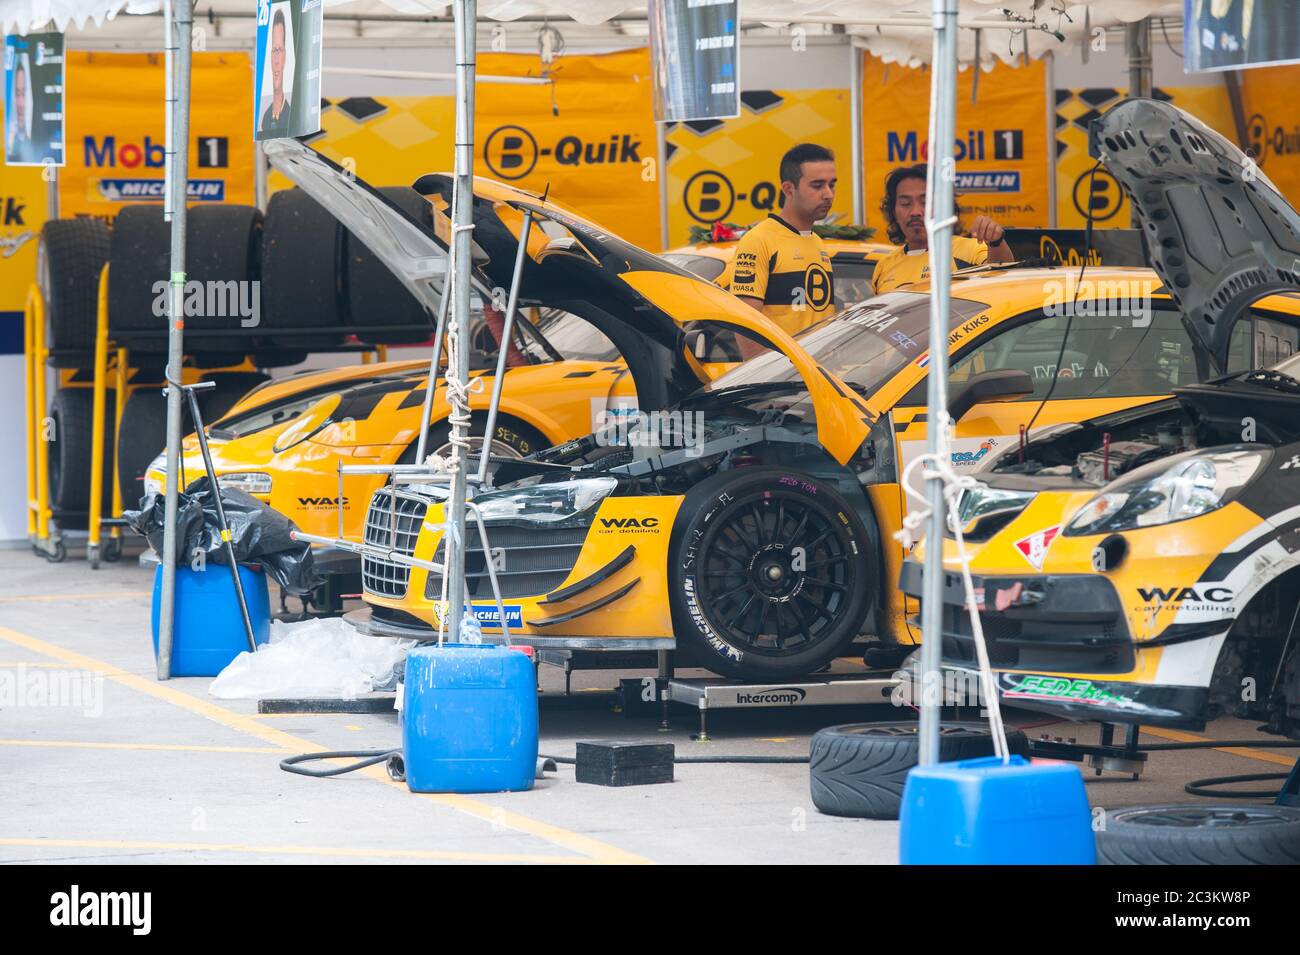 Bang Saen, Thailand - November 28, 2015: The cars of the B-Quik Racing Team, an Audi R8 and a Porsche 997 GT3 Cup, being prepared for Bang Saen Speed Stock Photo